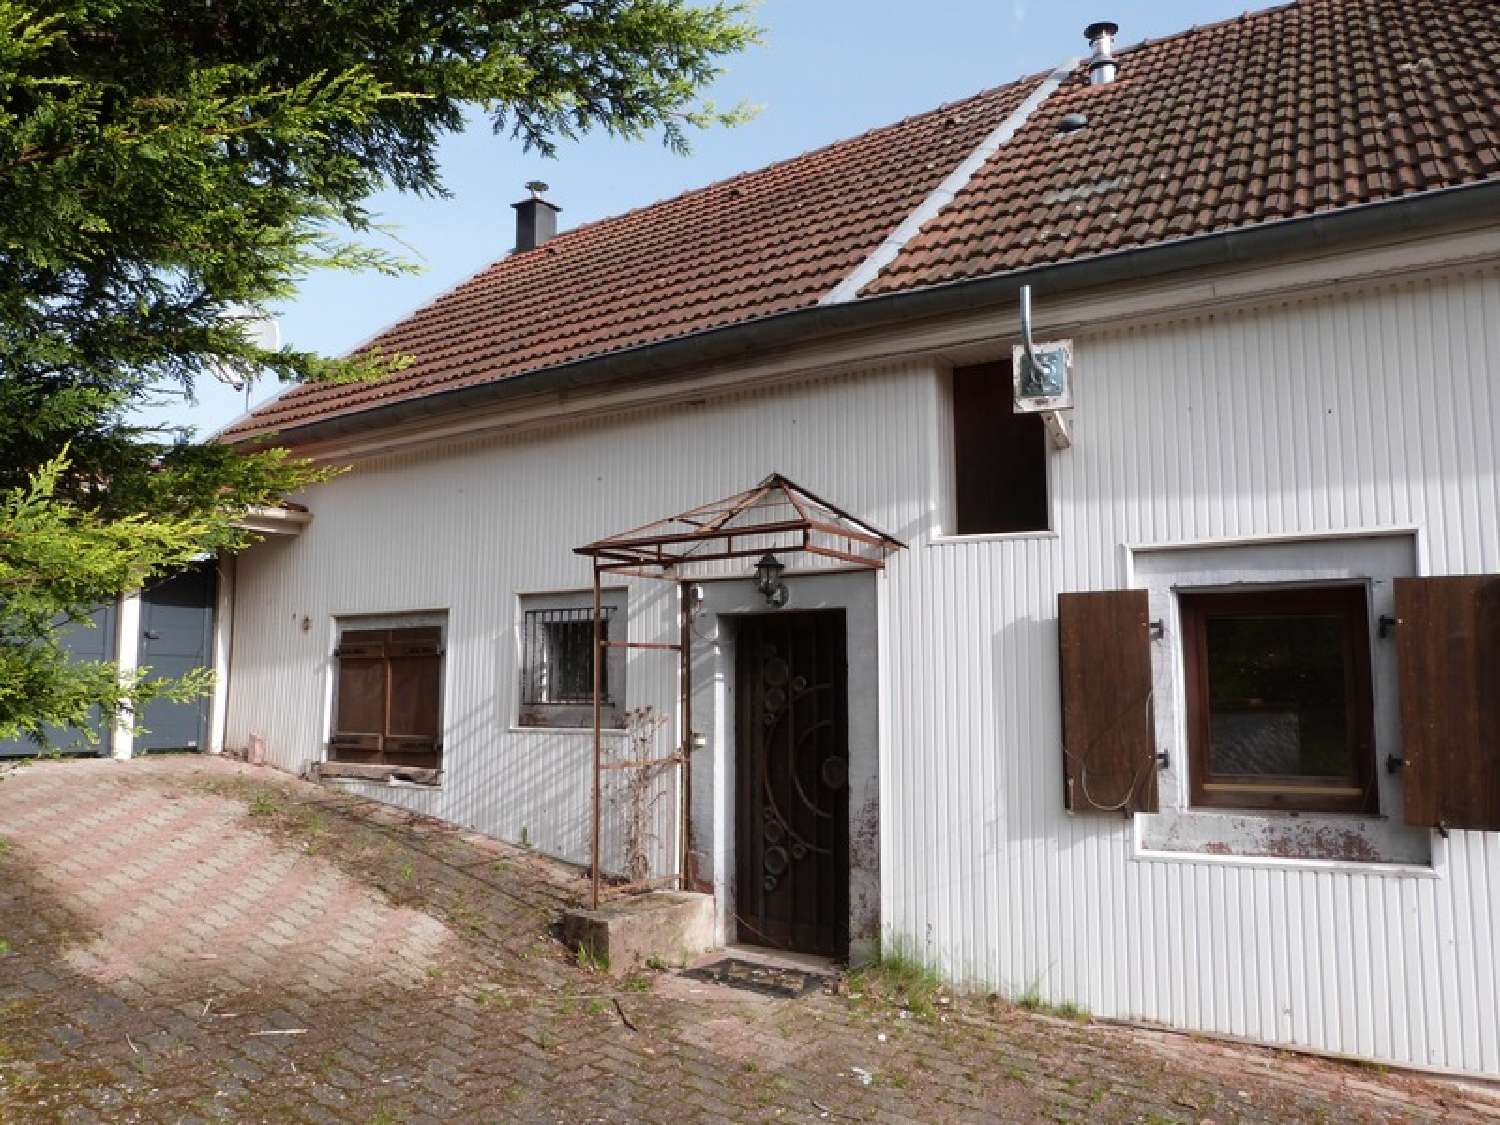  for sale house Soucht Moselle 1